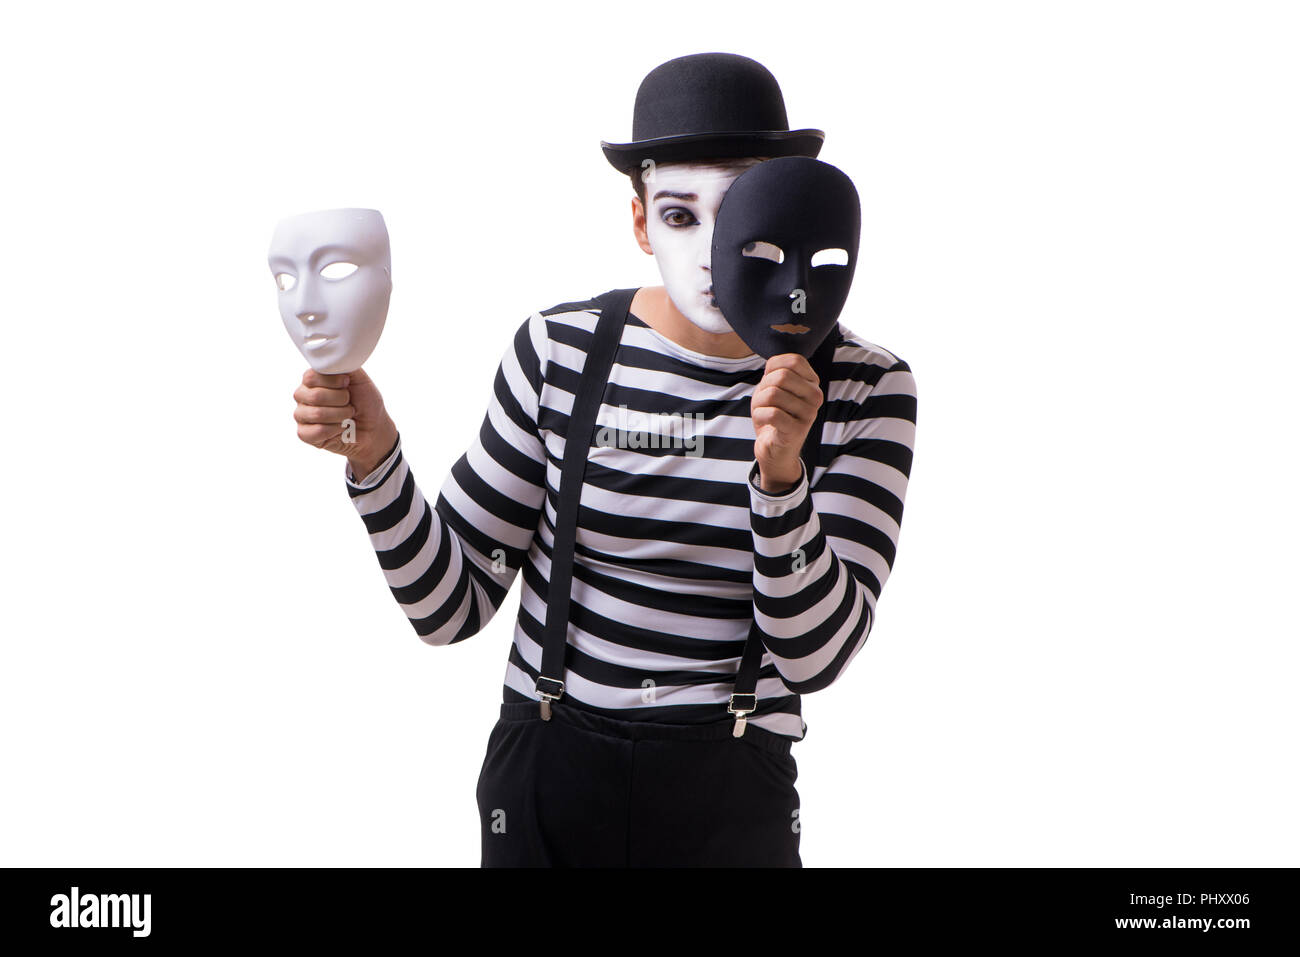 Mime with masks isolated on white background Stock Photo - Alamy